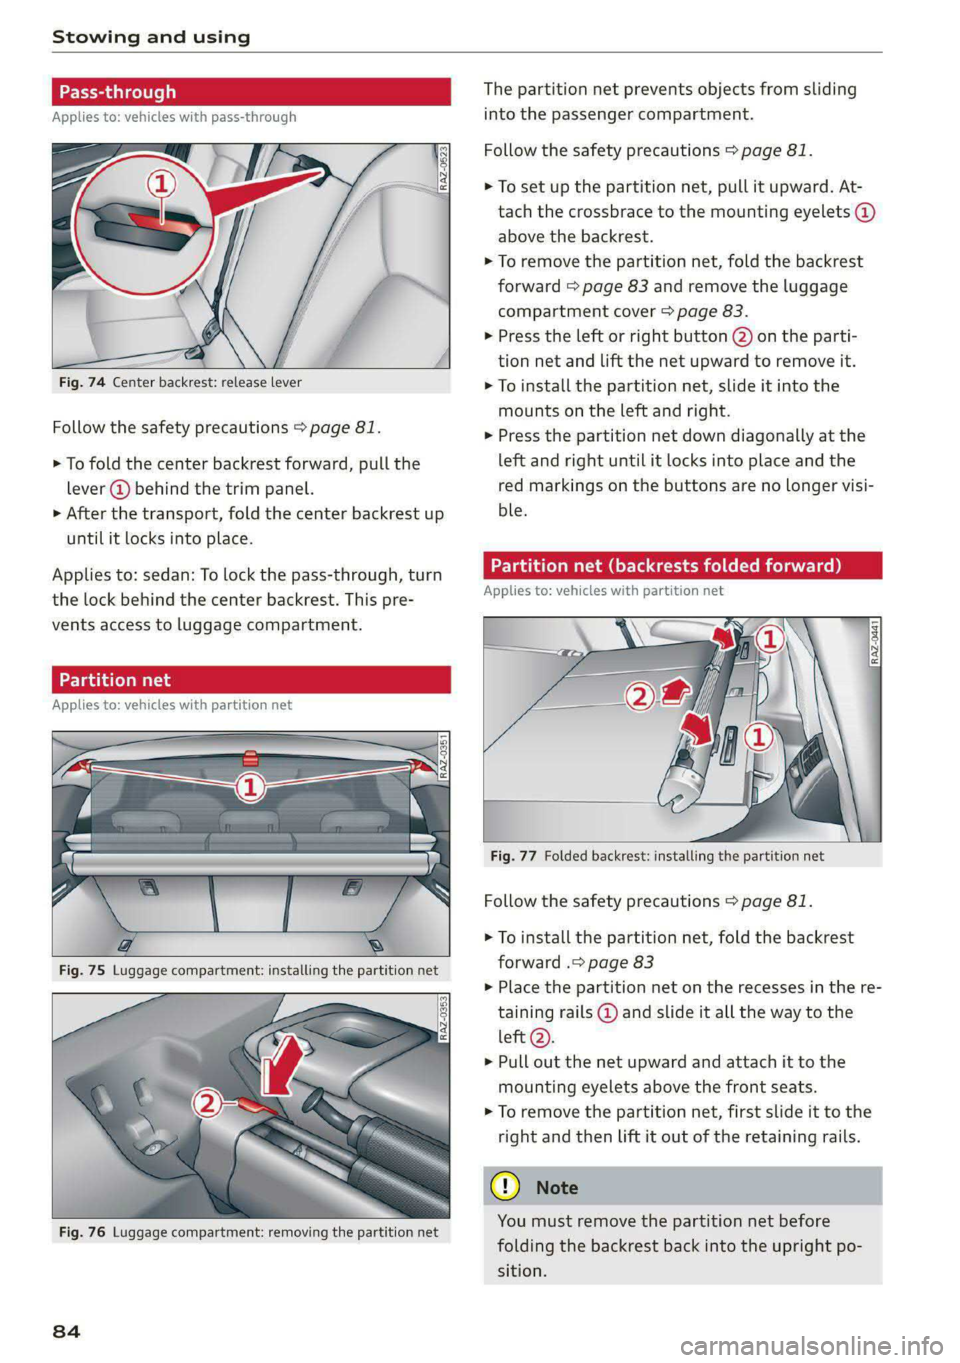 AUDI A6 2020  Owners Manual Stowing and using 
  
  
   
Fig. 74 Center backrest: release lever 
  
Follow the safety precautions > page 81. 
> To fold the center backrest forward, pull the 
lever @ behind the trim panel. 
> Aft